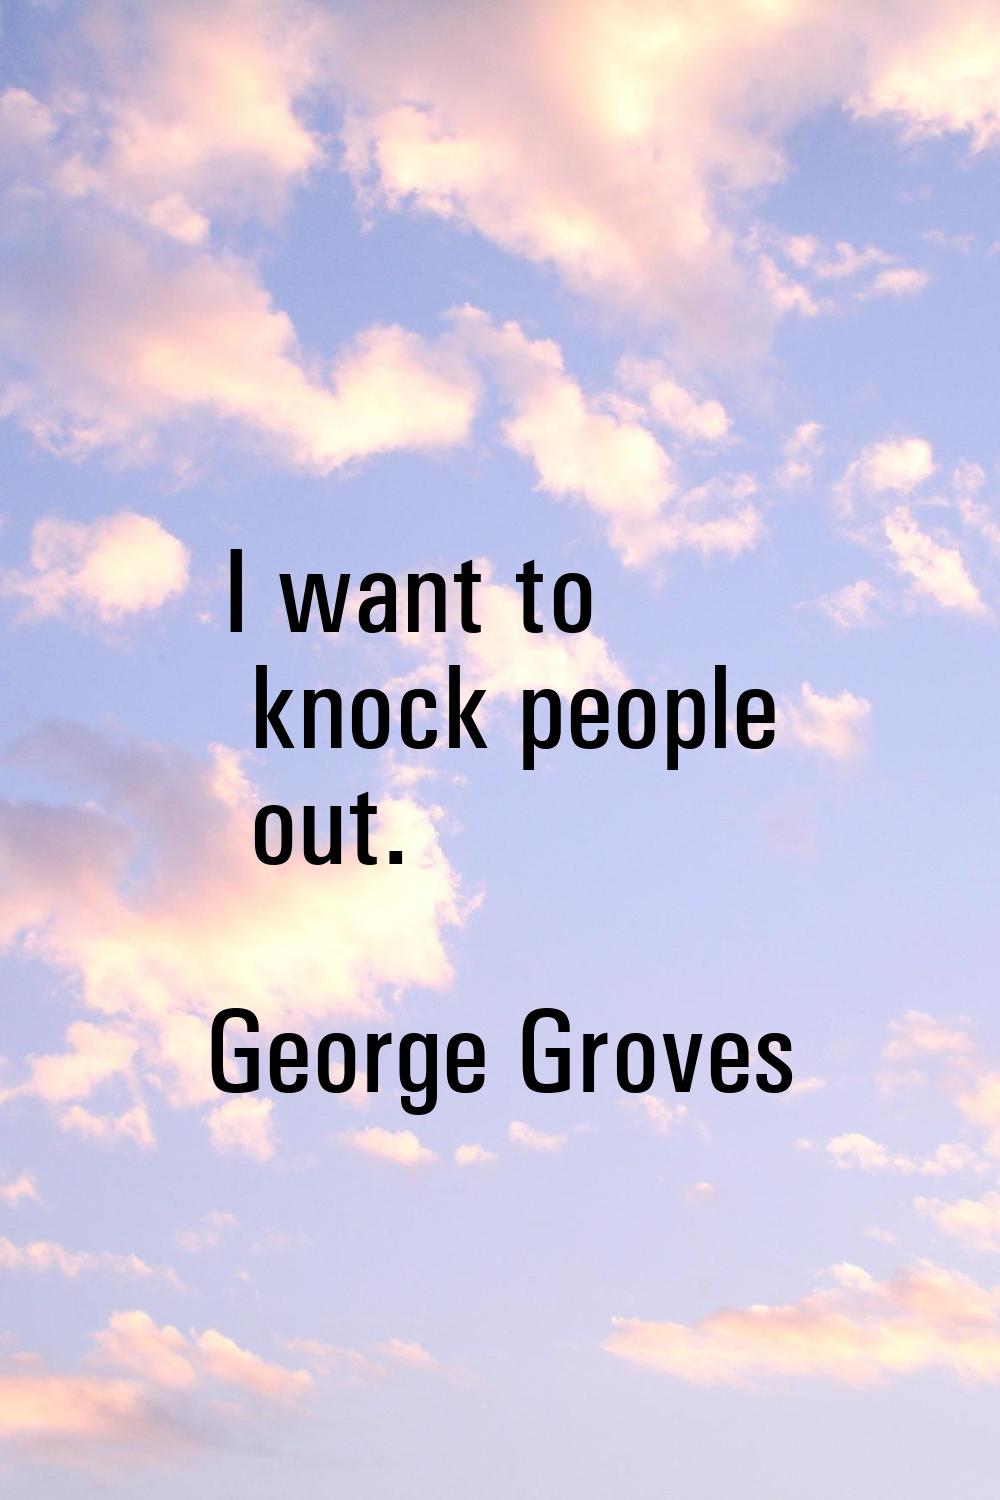 I want to knock people out.